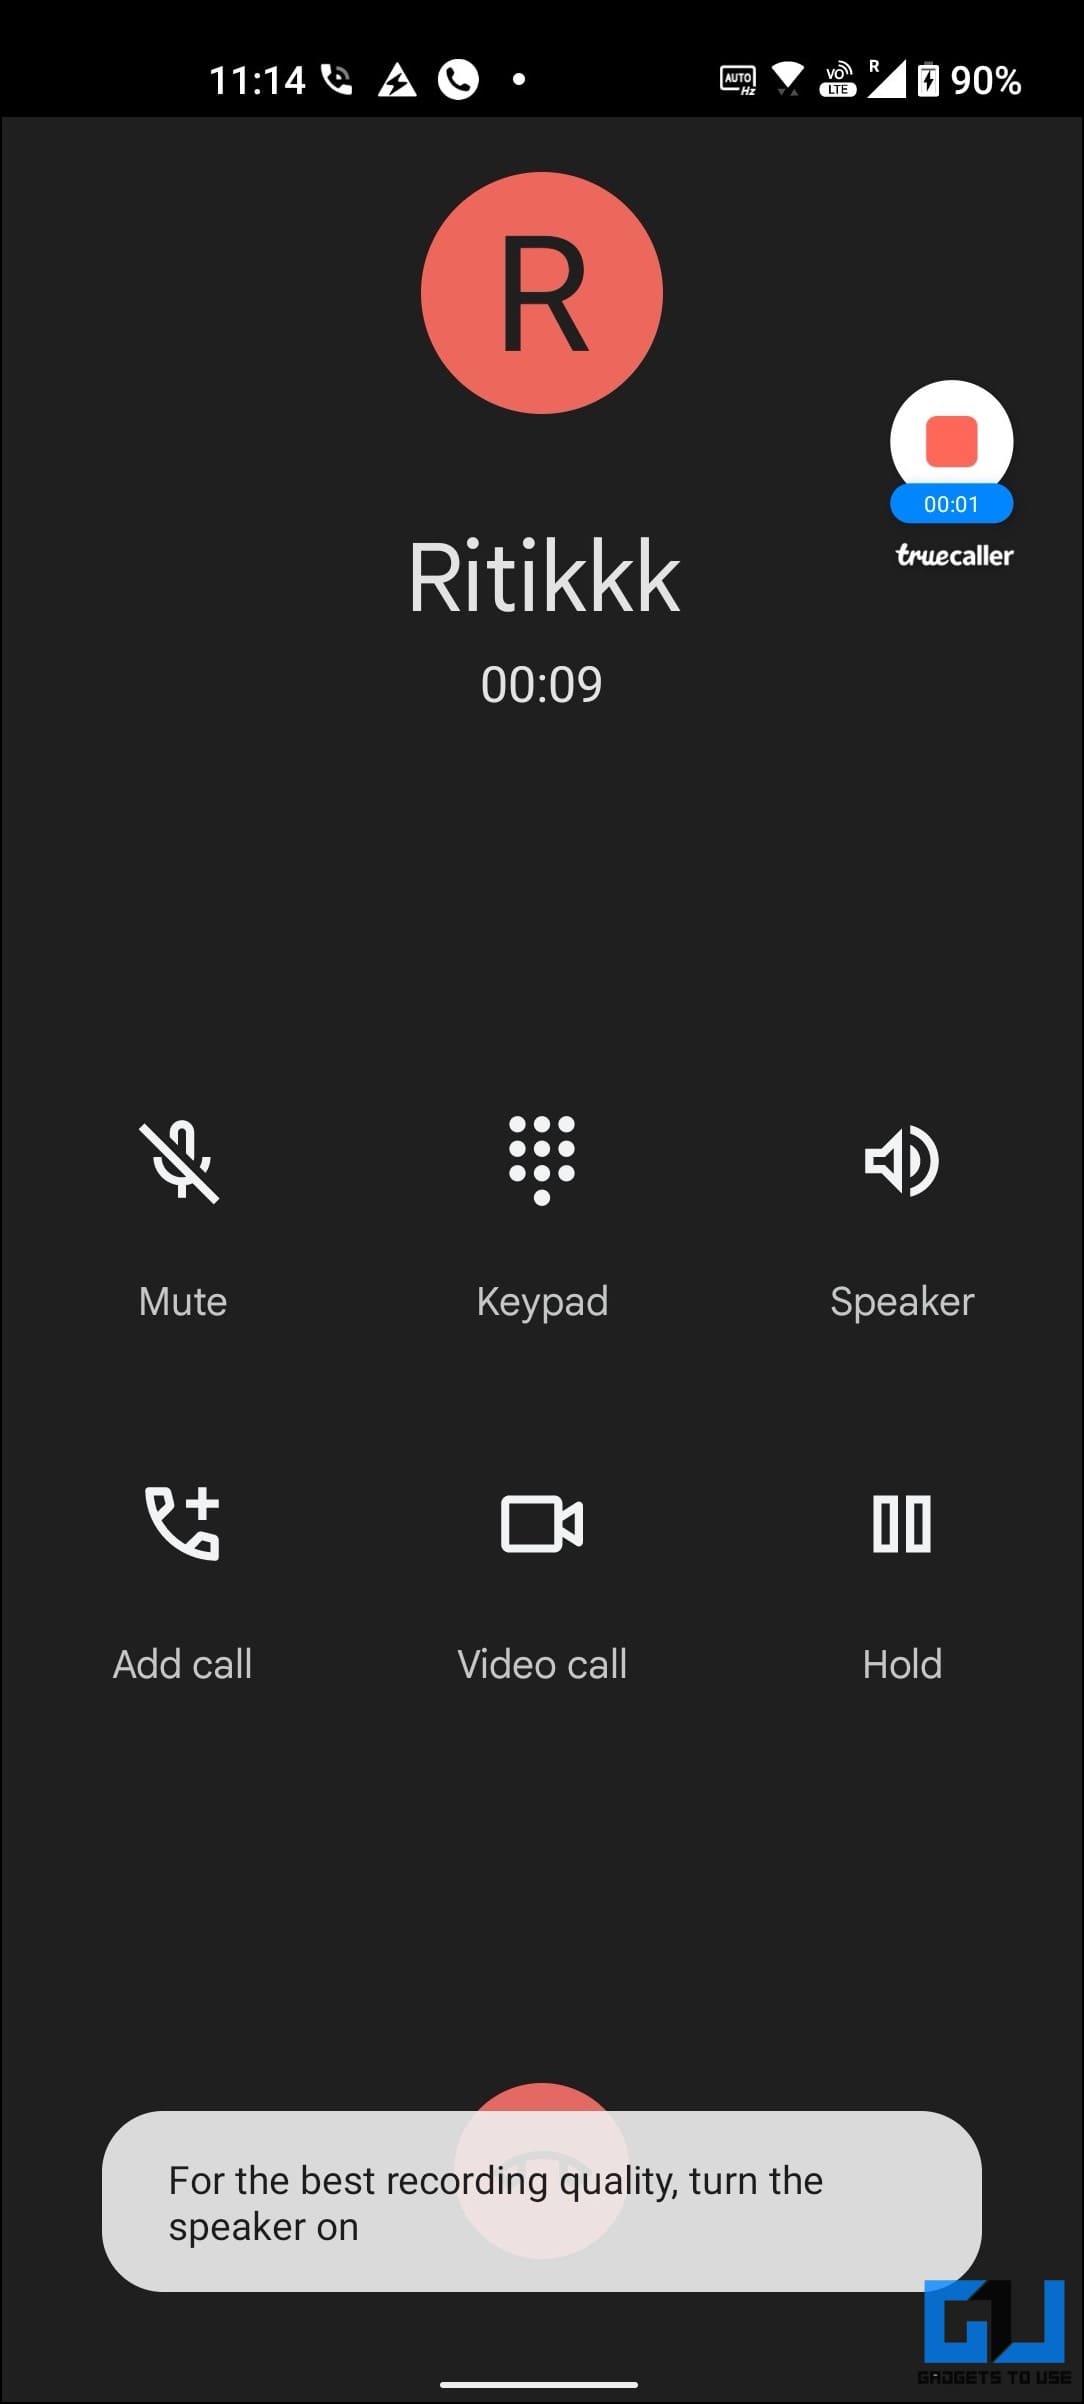 Record Calls Without Warning Using Truecaller